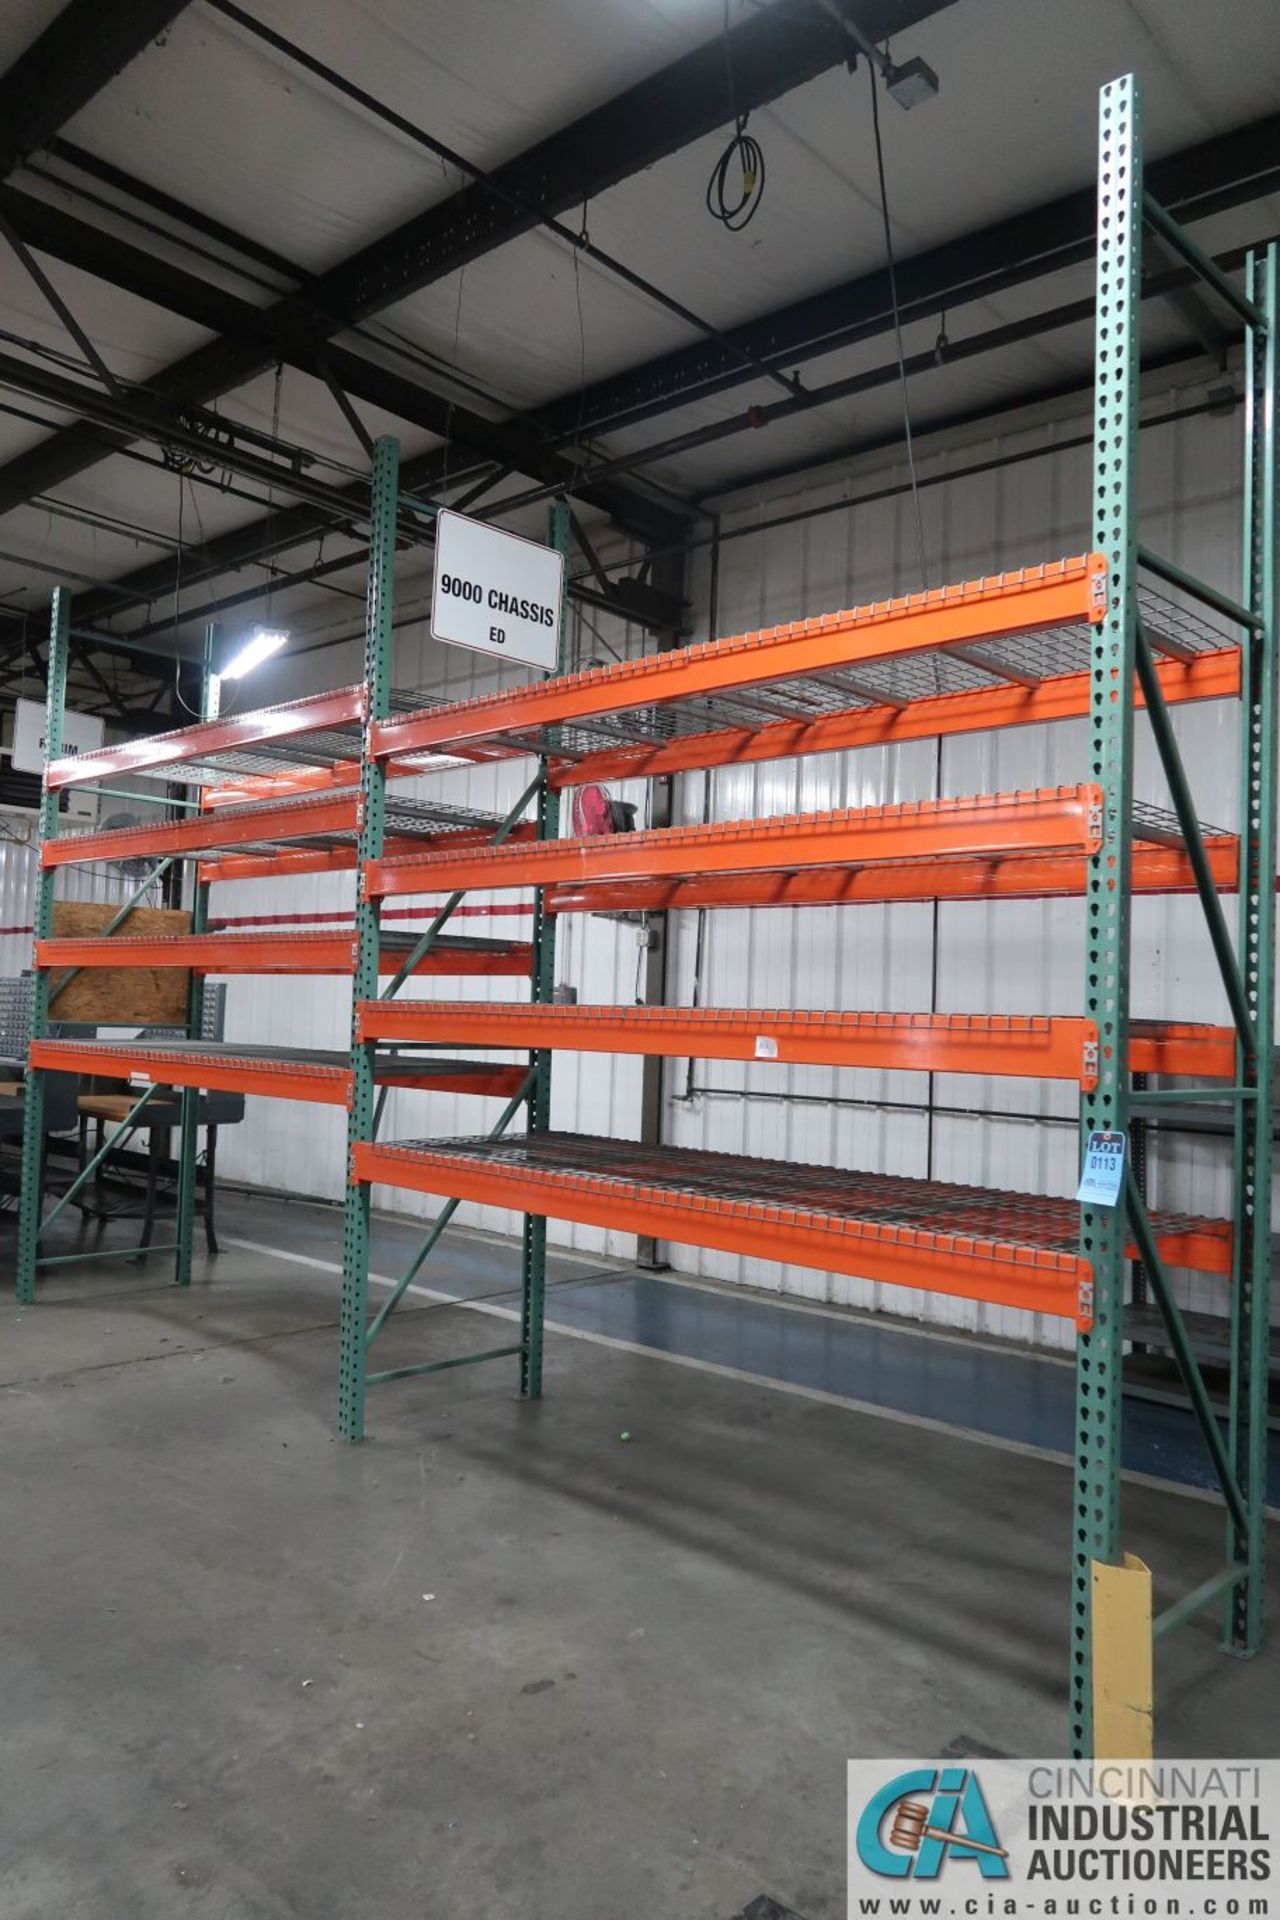 Sections 36" x 108" x 12' High Pallet Rack; (3) Uprights, (16) 5" x 108" Beams, (16) Wire Decks